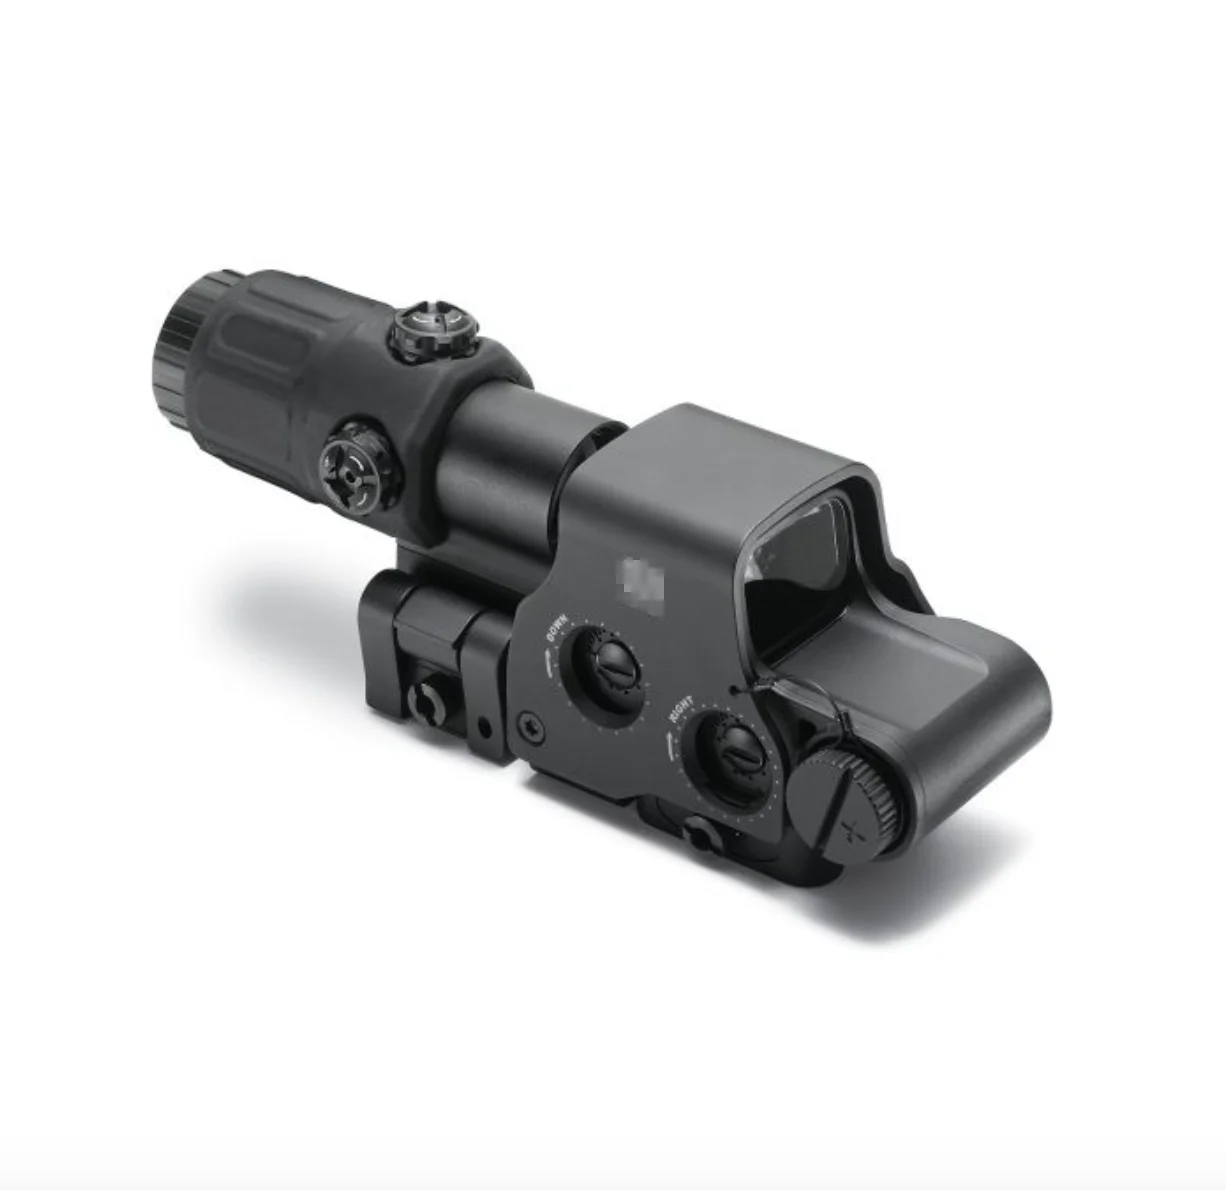 

Tactical 558 Red Dot Sight G33 Magnifier Holographic Scope 553 Hunting Reflex Sights For 20mm Mount Airsoft Riflescope, Matte black